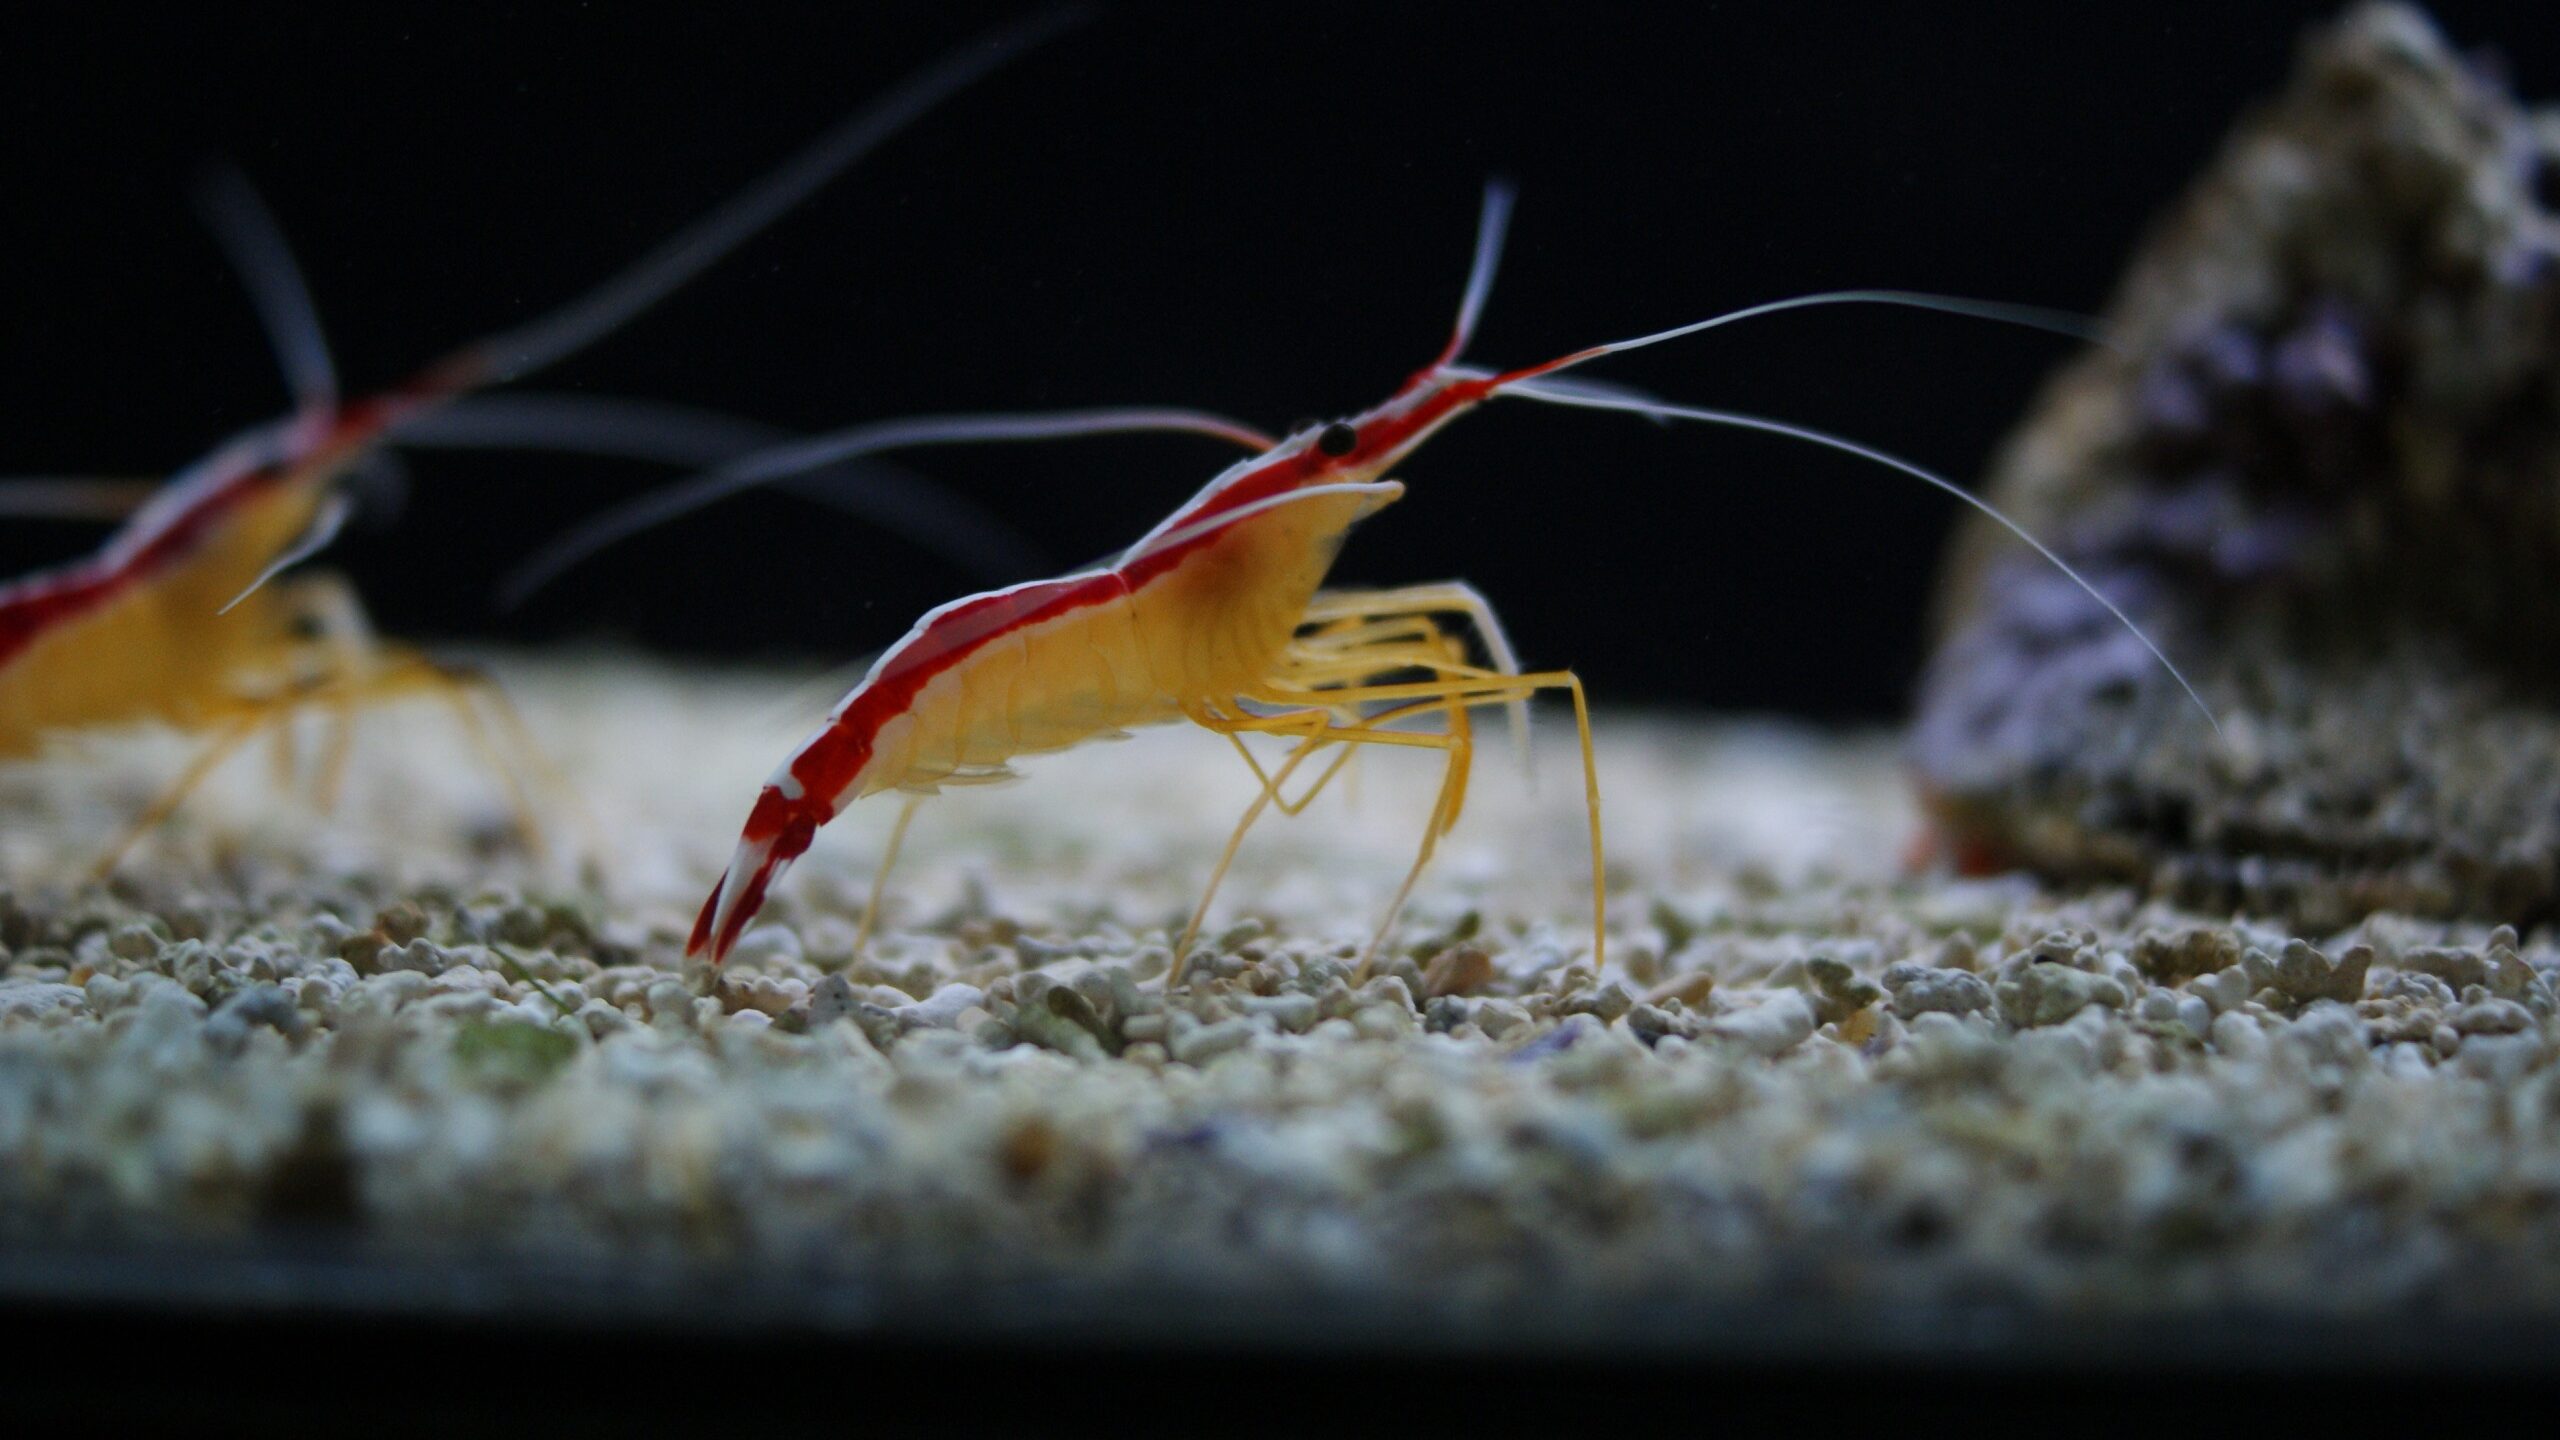 Shrimp Discovered as Potential Natural Whitening Agent by Israeli Researchers